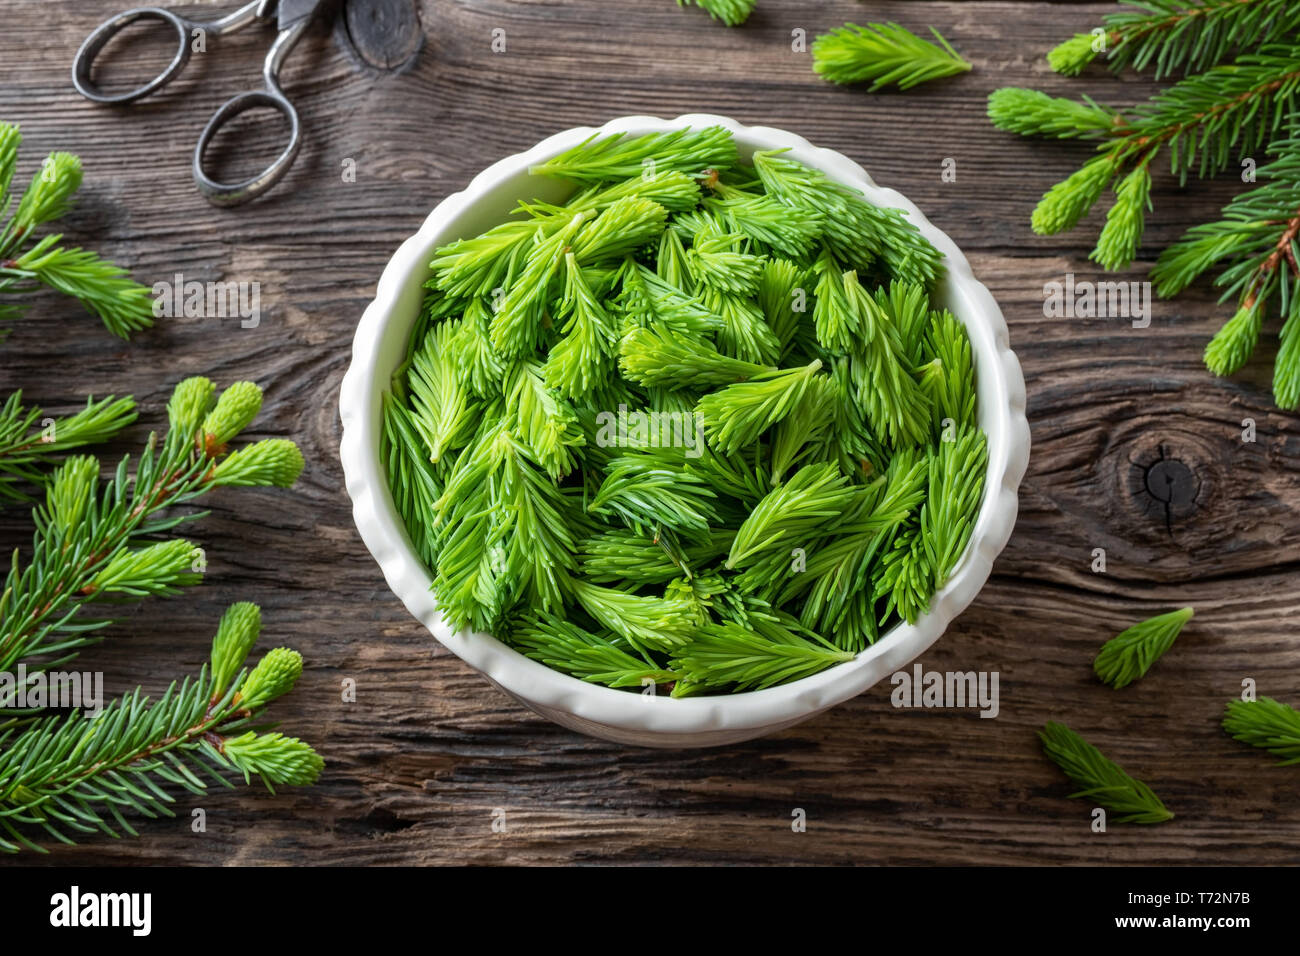 Young spruce tips collected to prepare homemade herbal syrup Stock Photo